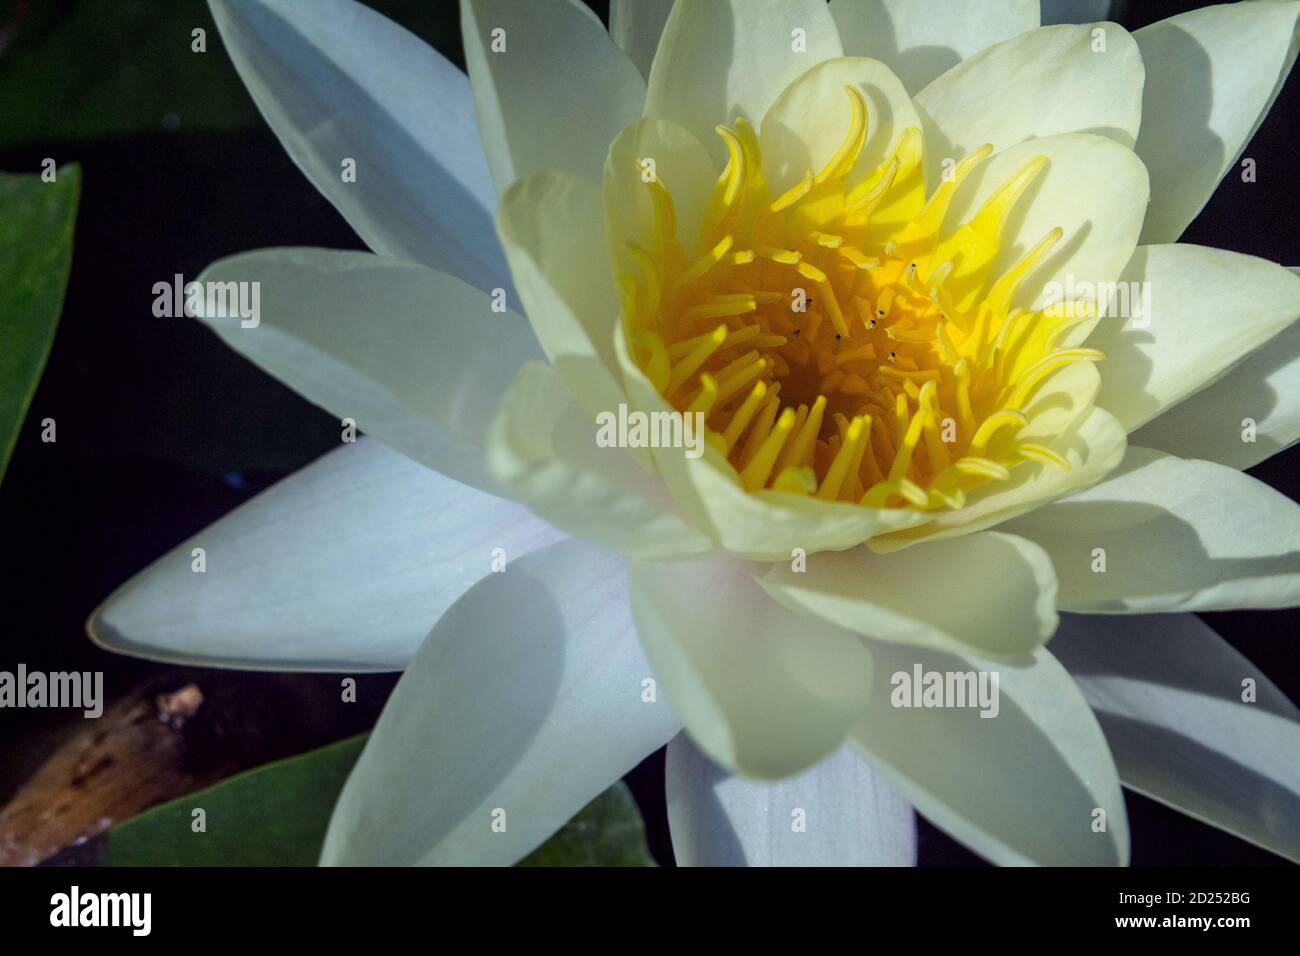 Detail of a blossomed white lotus flower Stock Photo